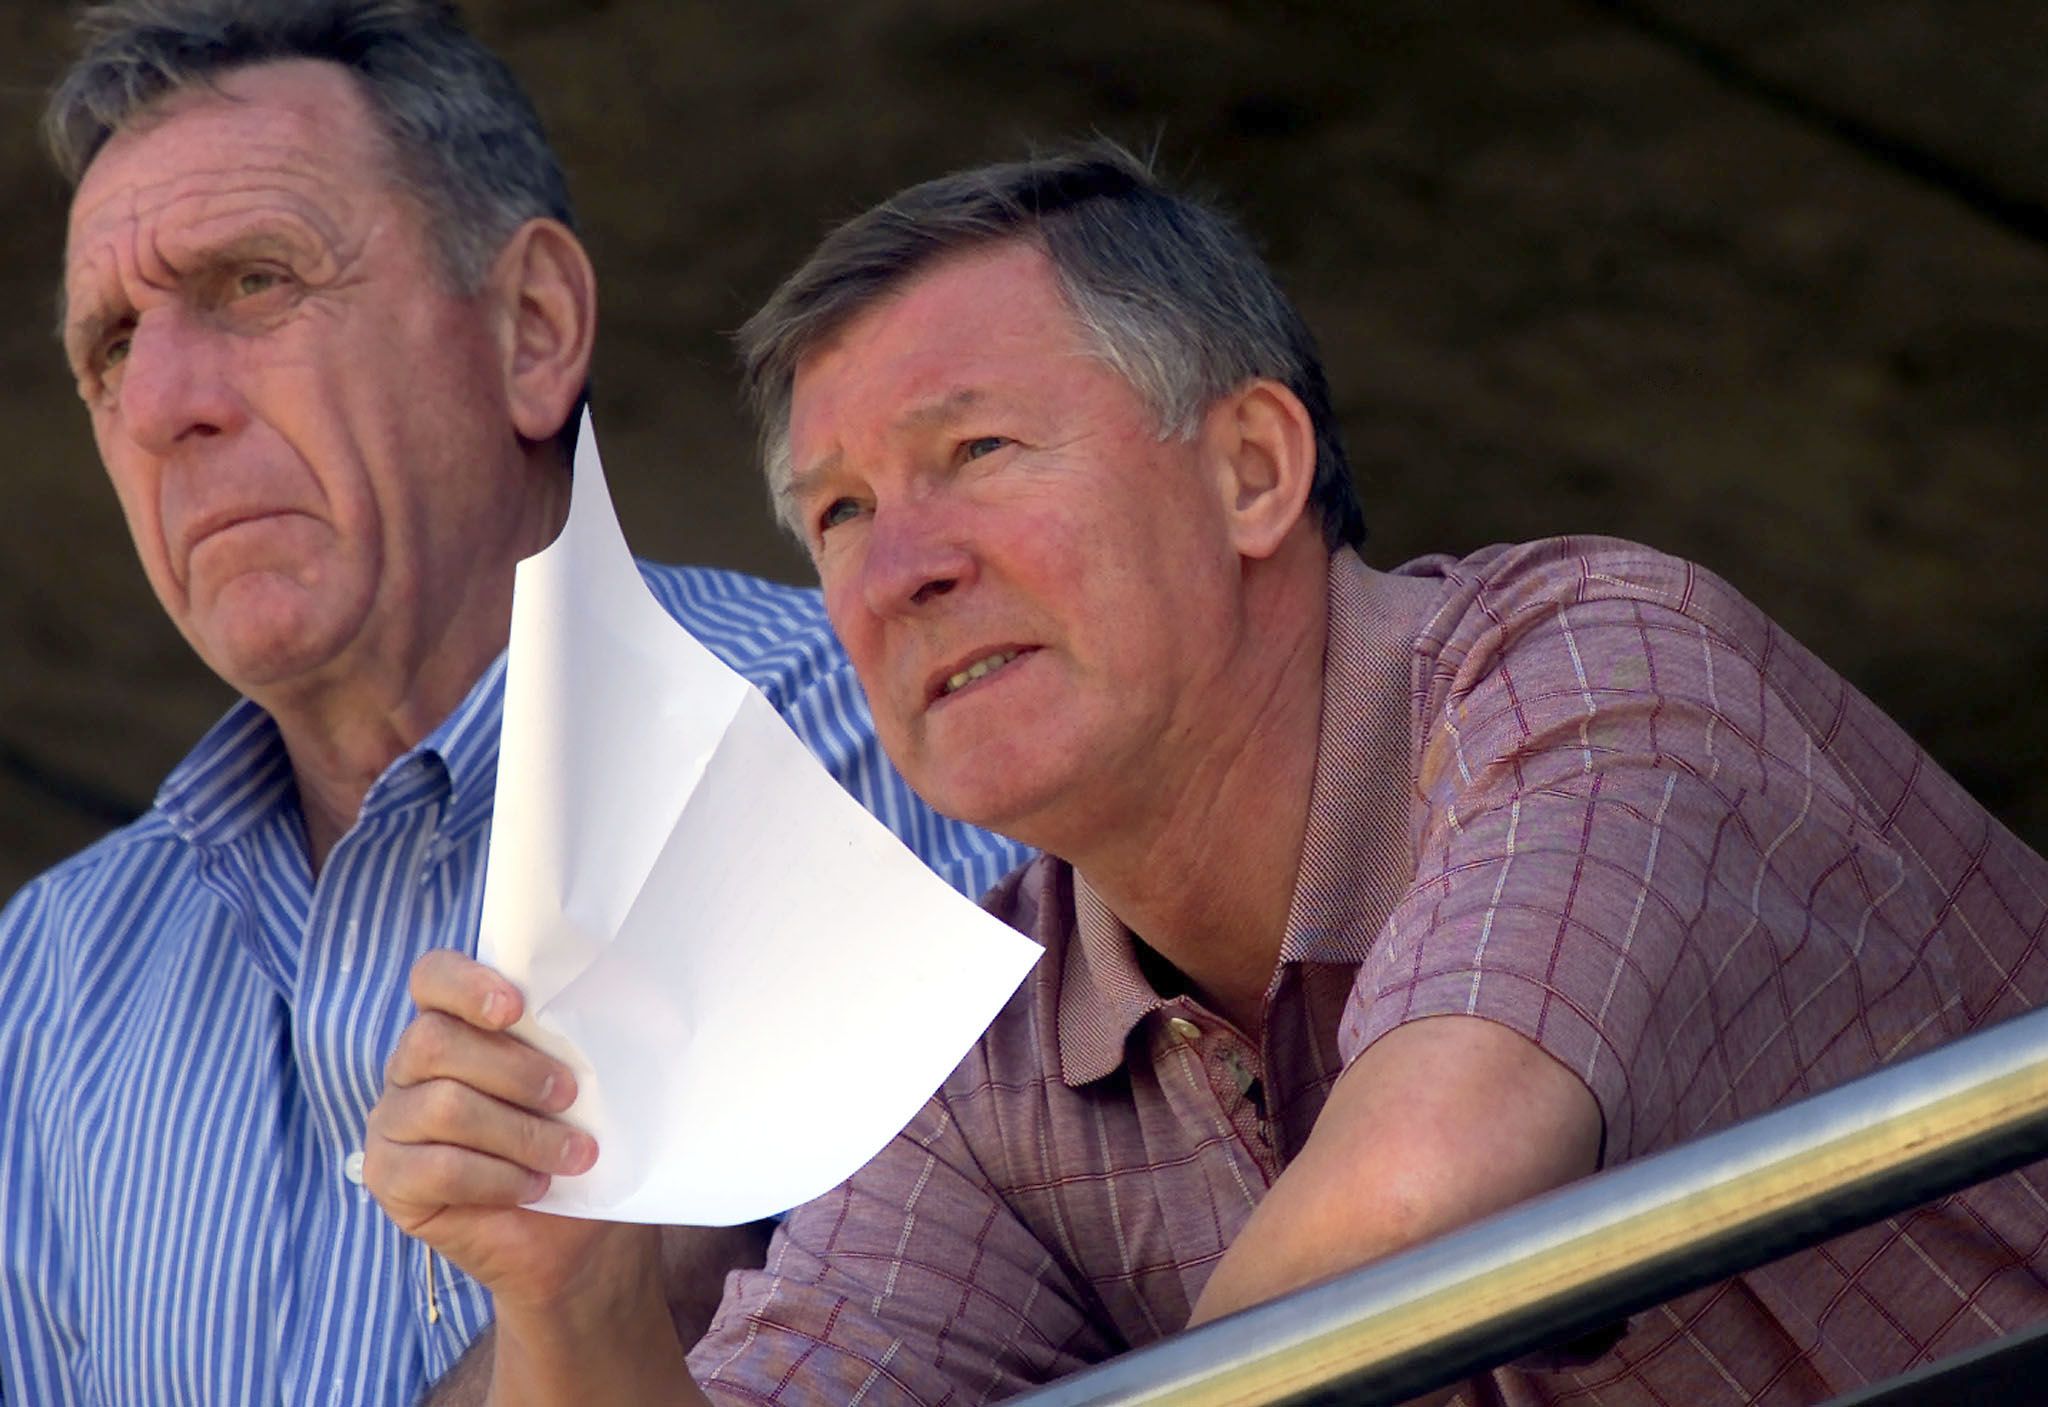 MANCHESTER UNITED MANAGER SIR ALEX FERGUSON WATCHES A COACHING CLINIC IN PRETORIA.